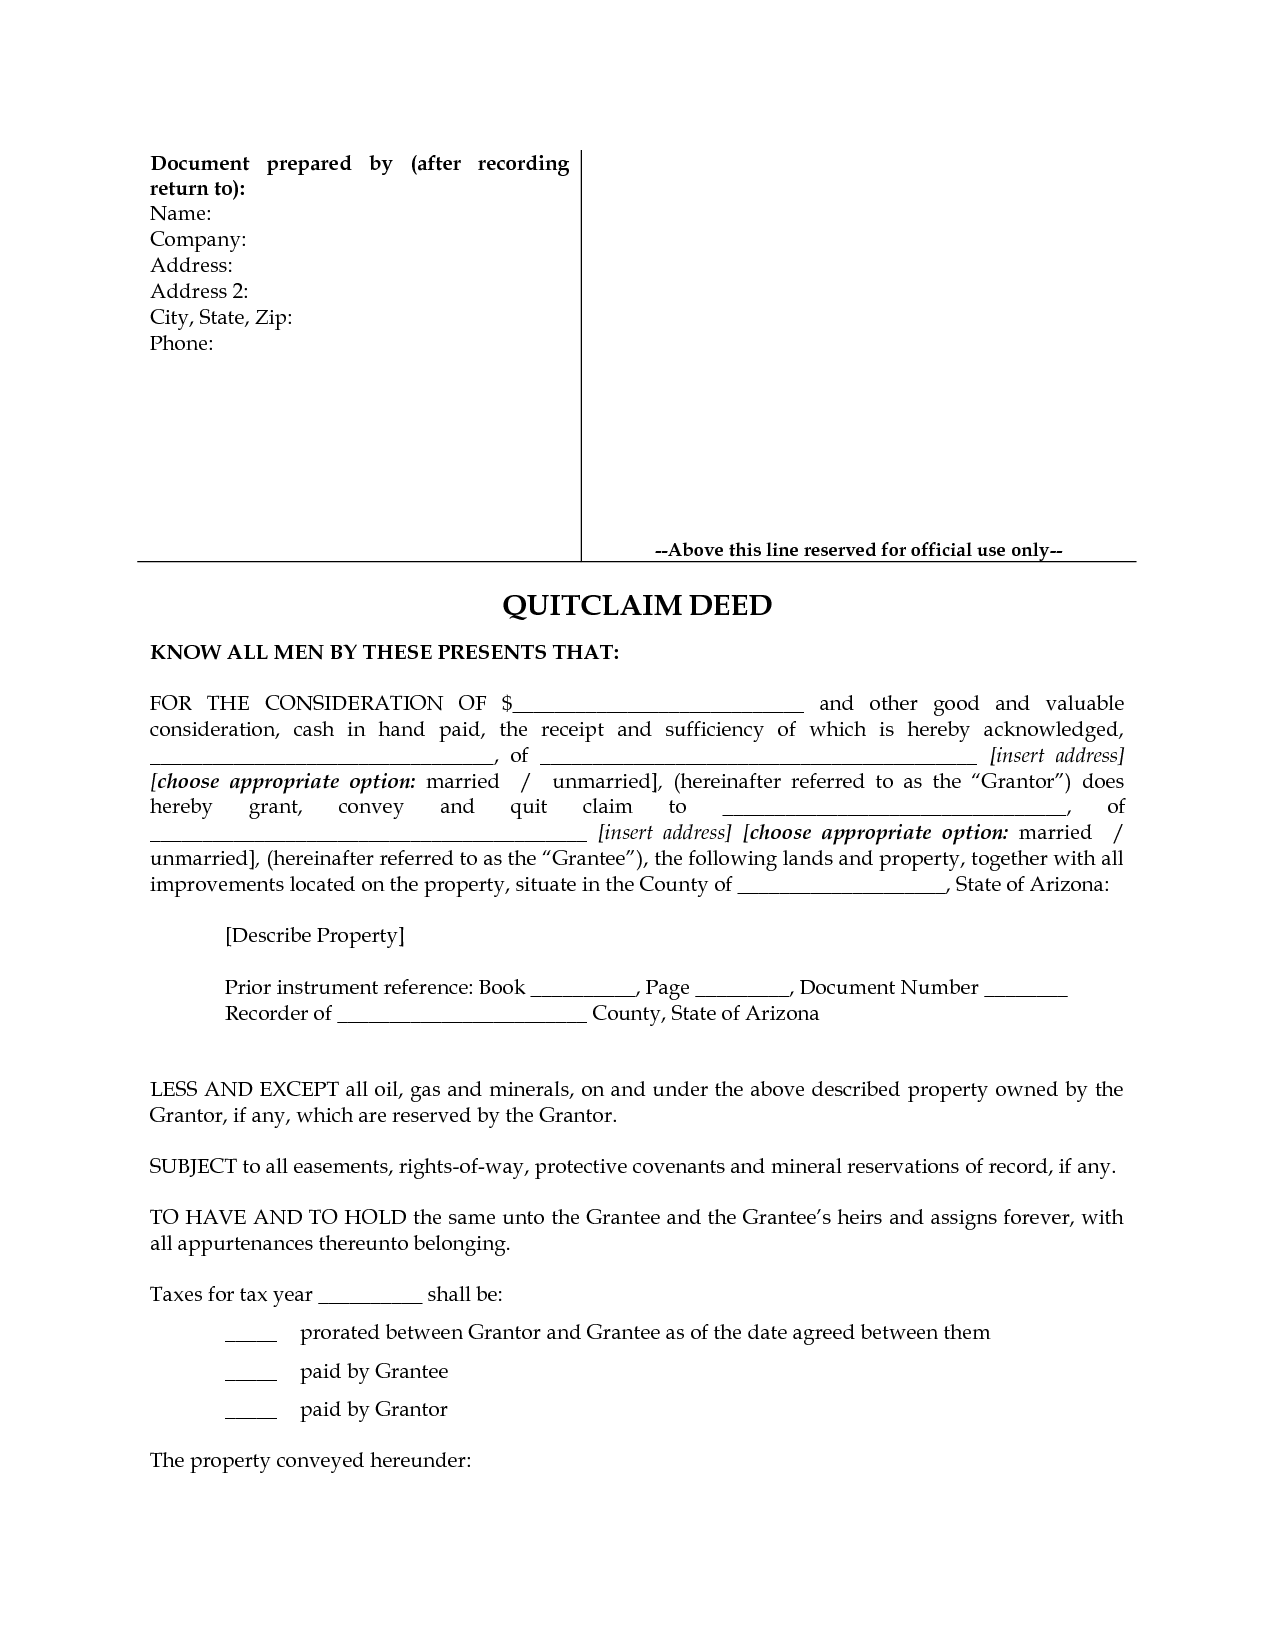 Quit Claim Deed Maricopa County Fill Online, Printable, Fillable 